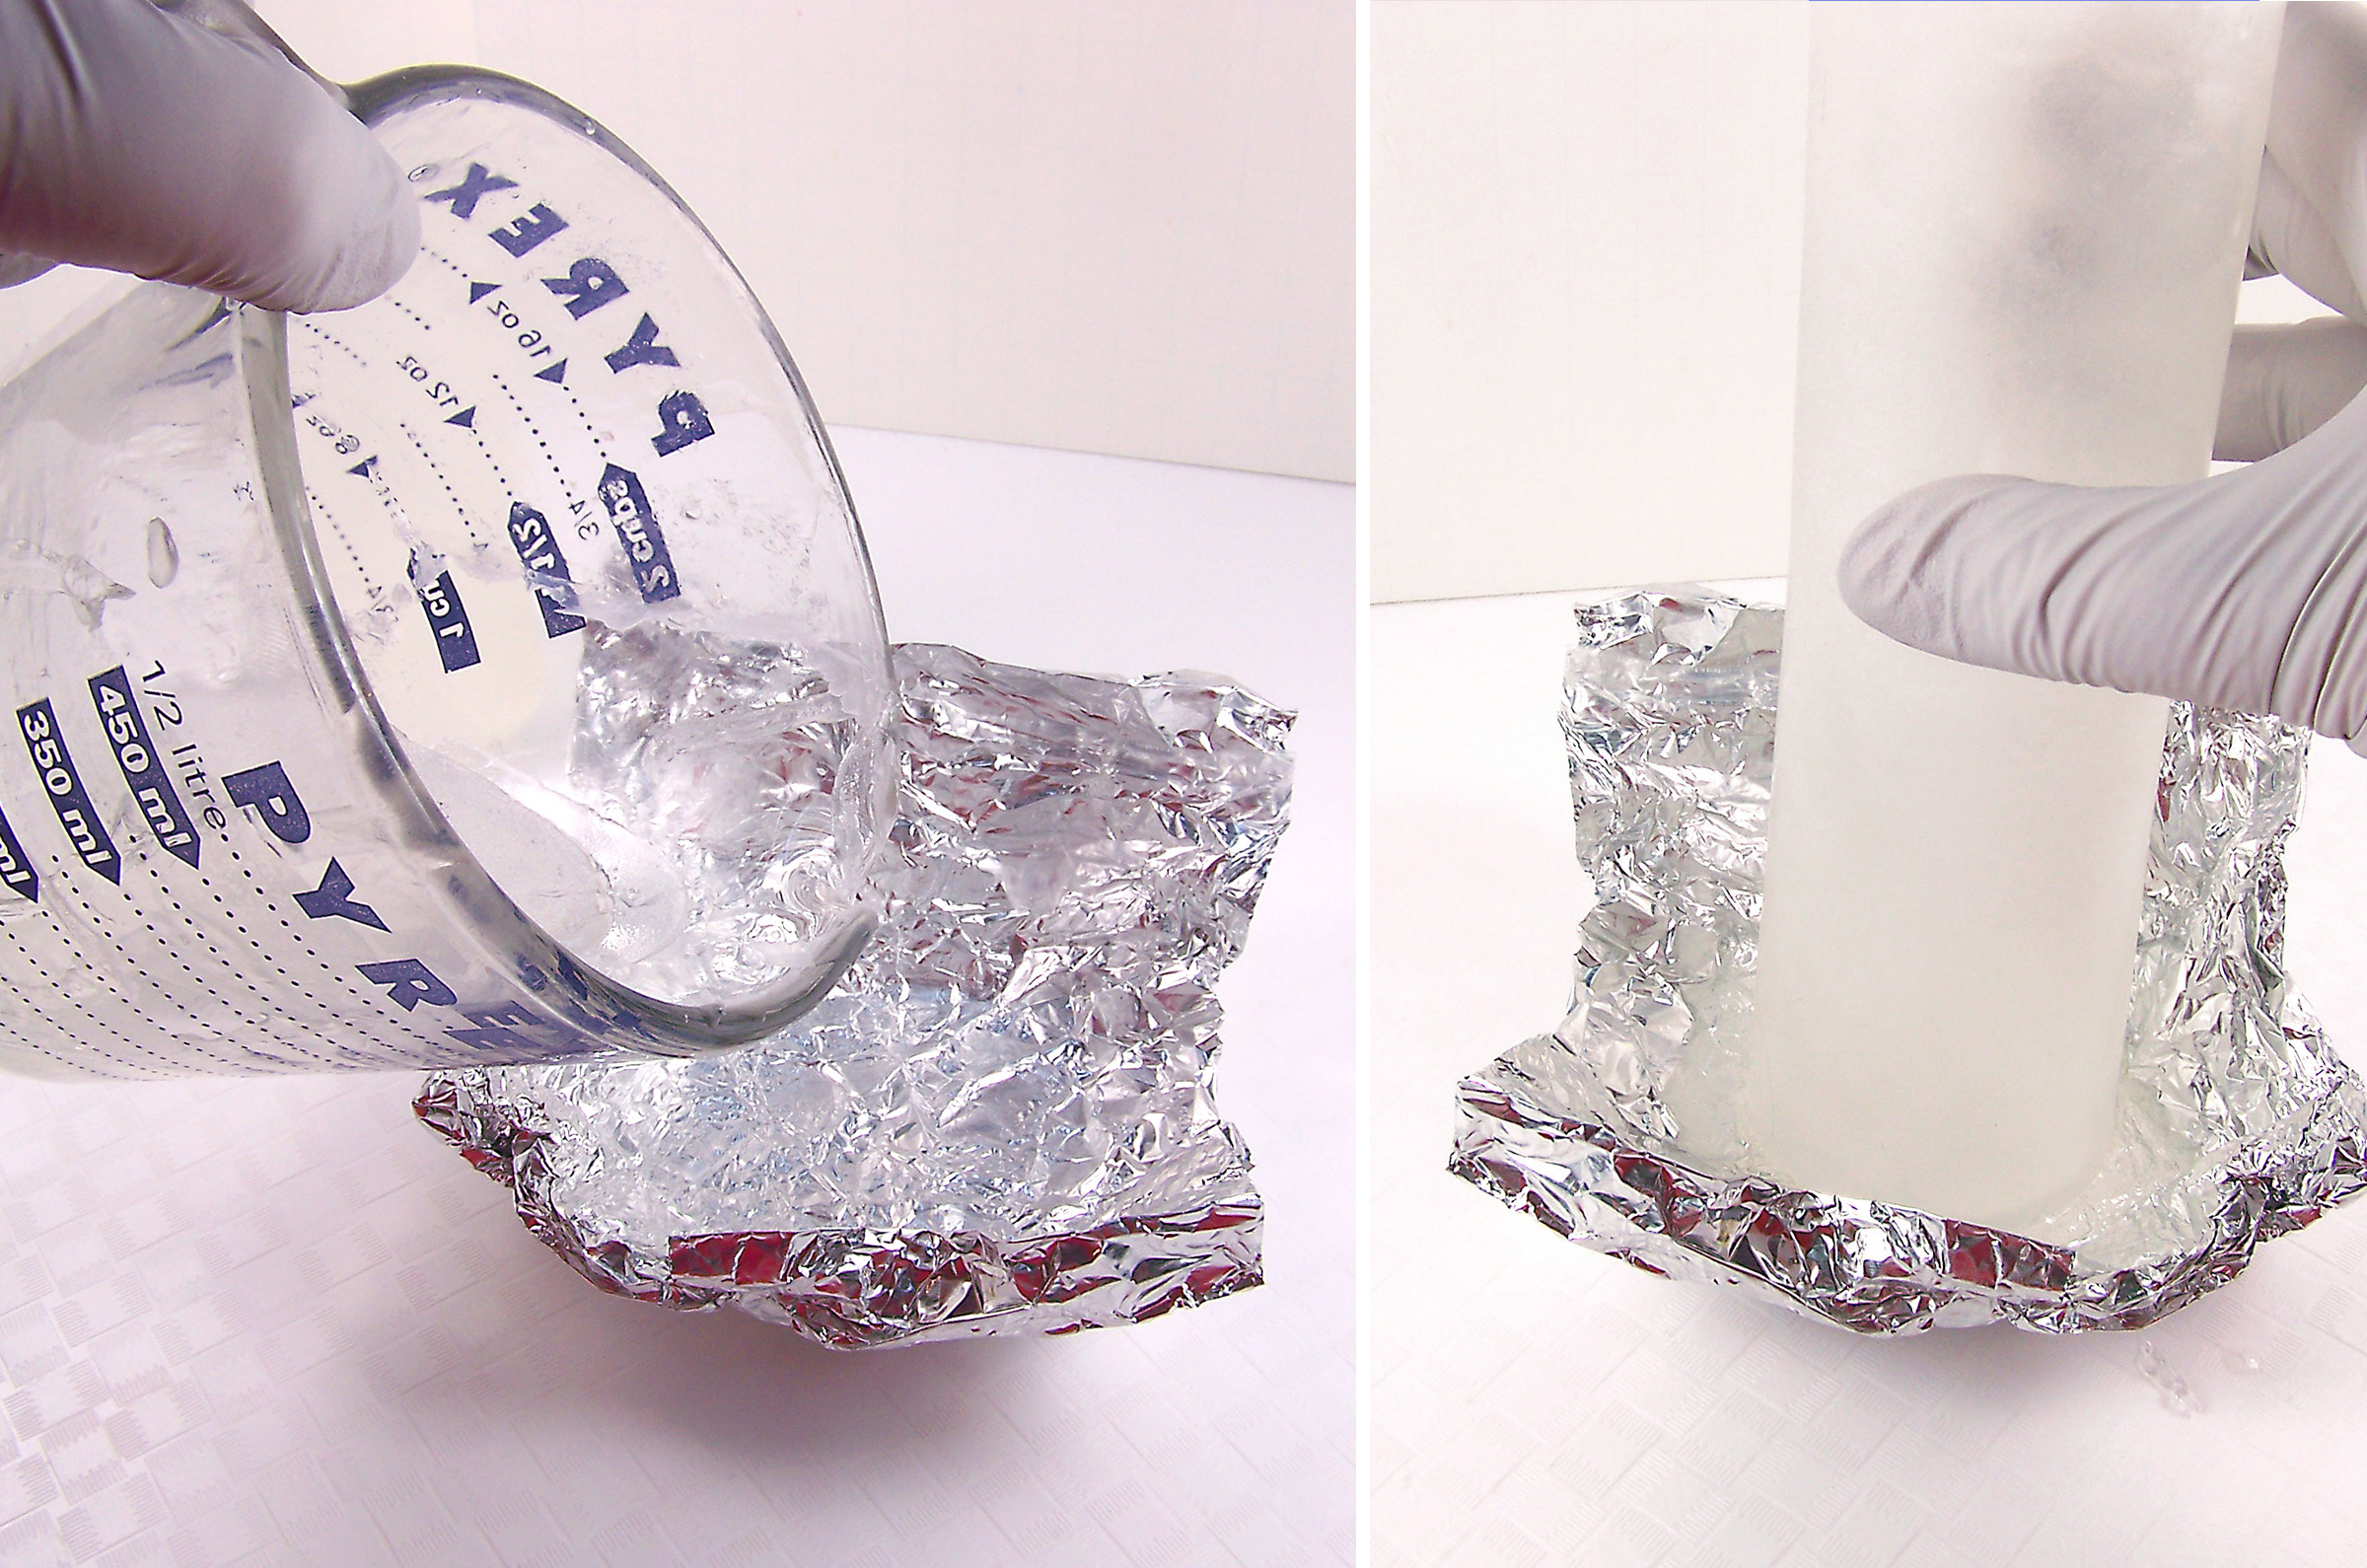 pour small amount of soap into aluminum foil and place soap roll end into soap and allow to set